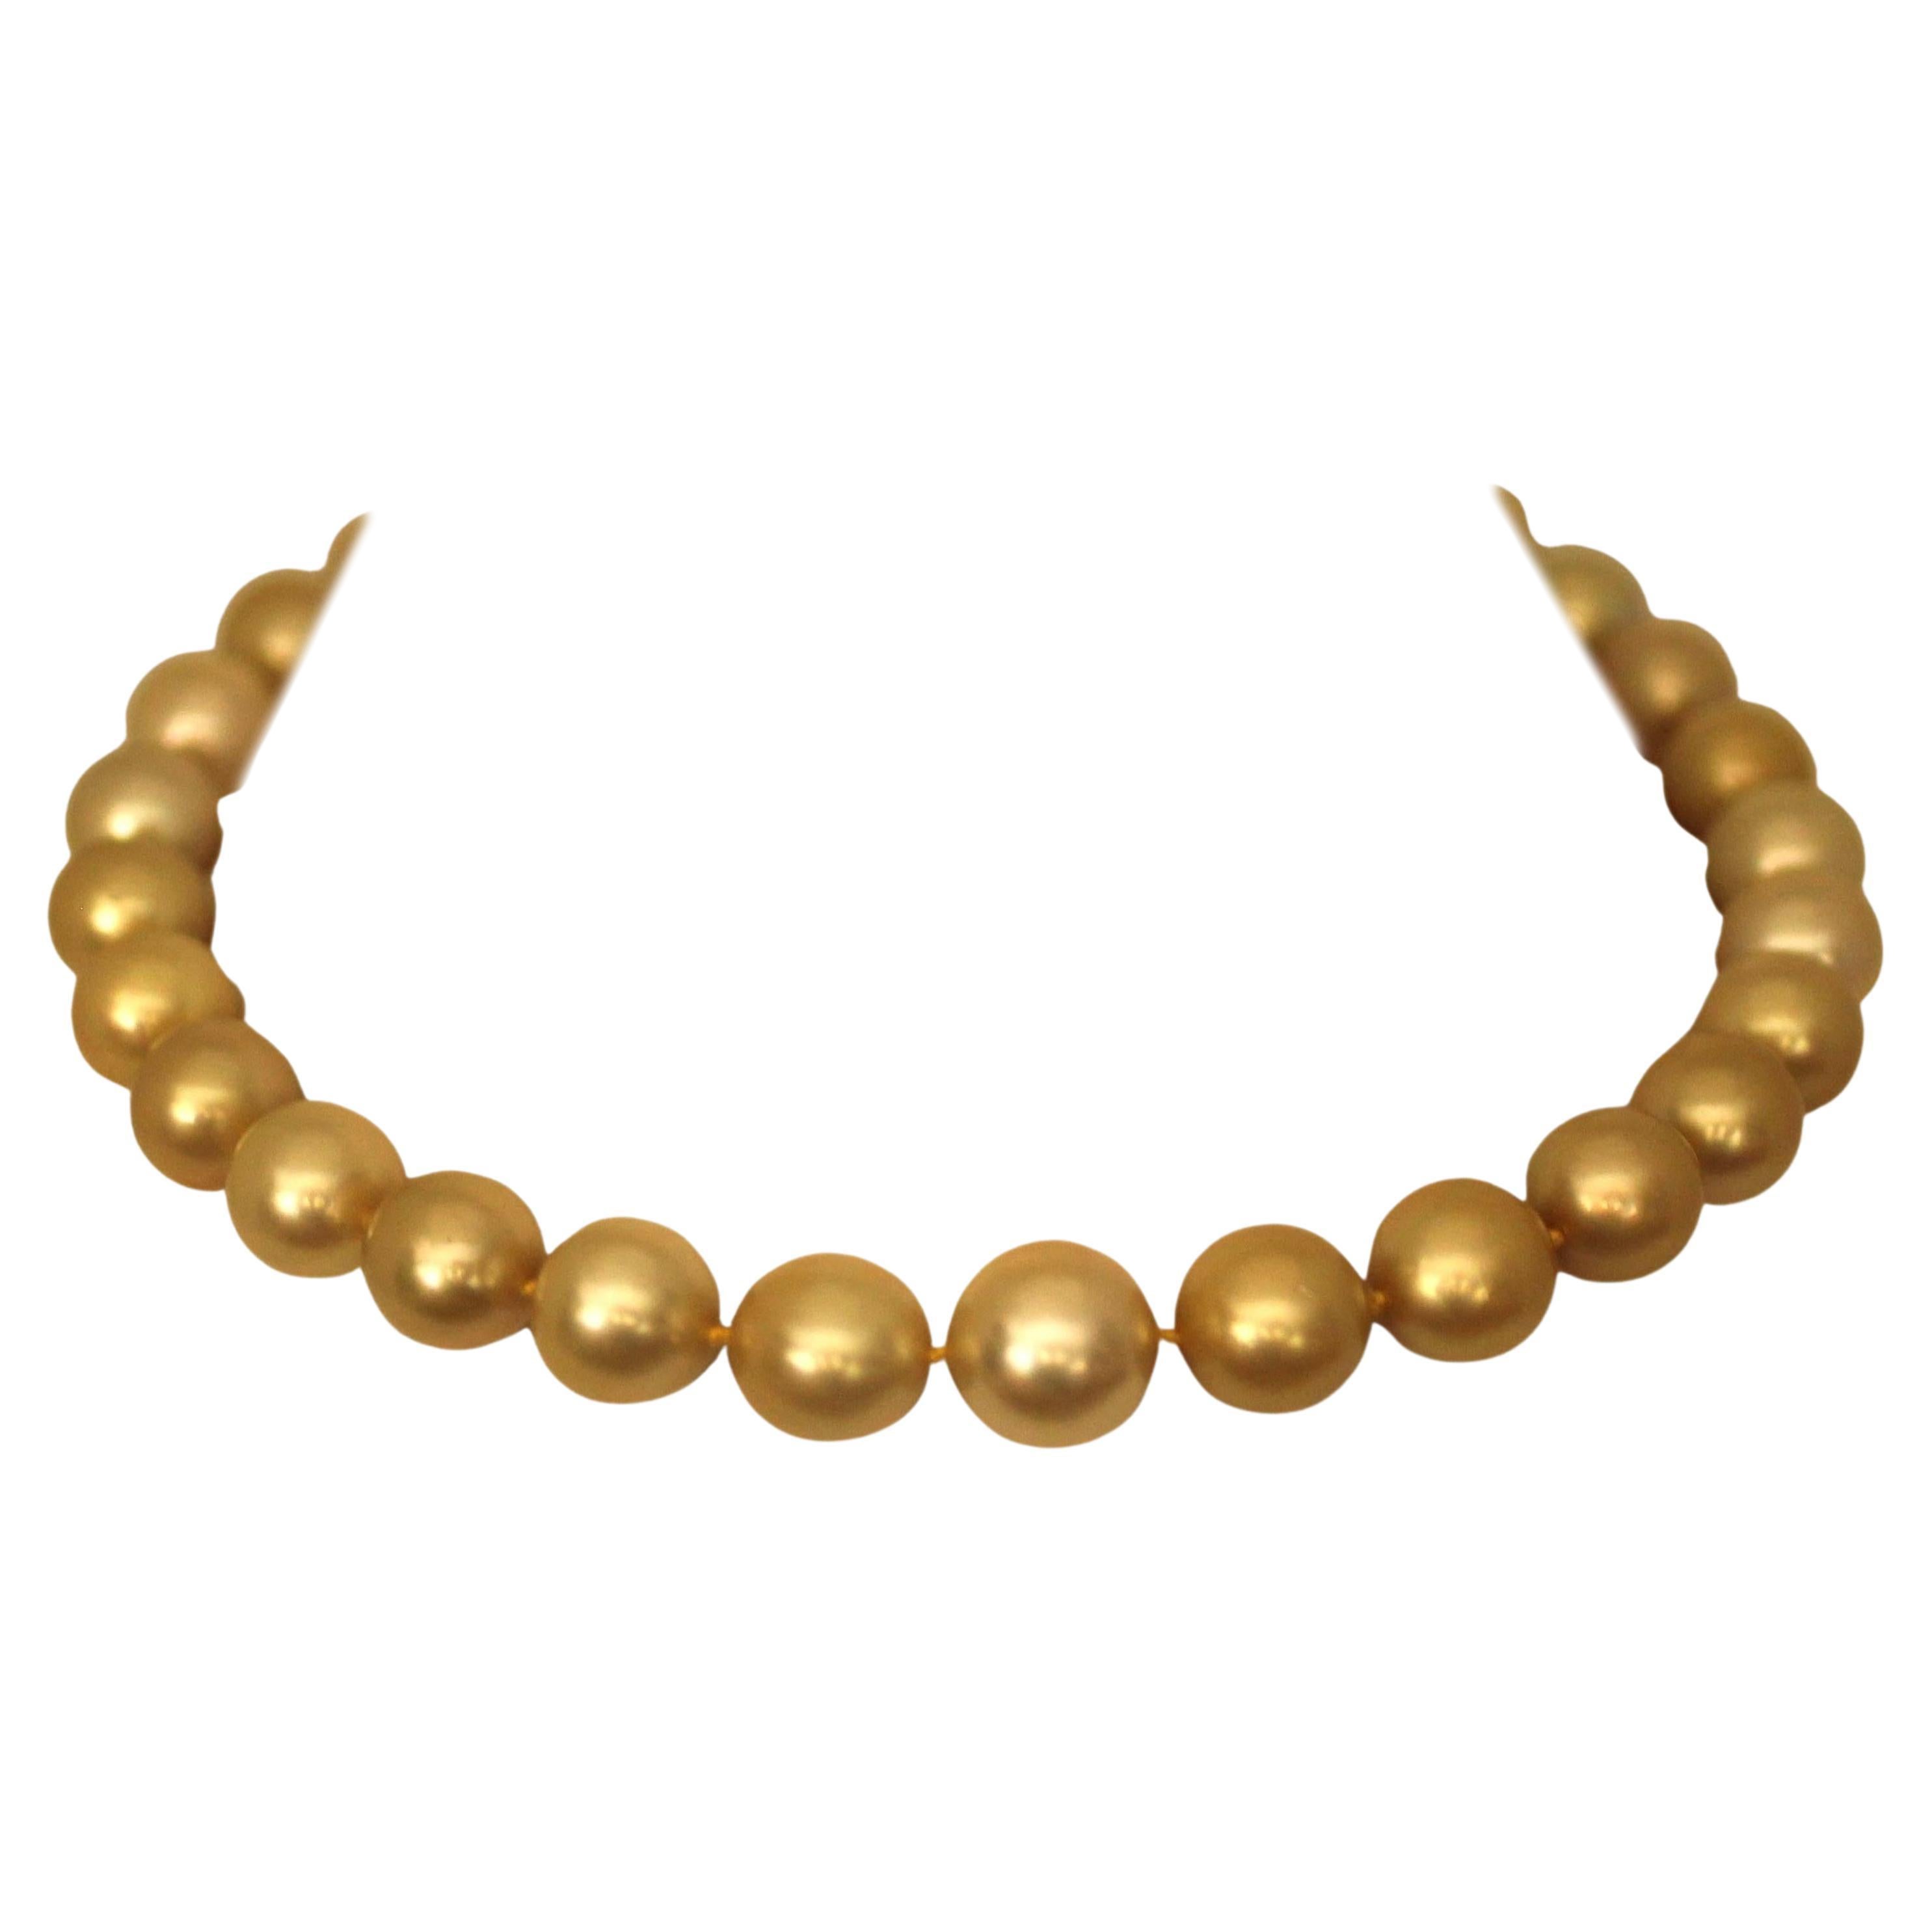 Hakimoto By Jewel Of Ocean
Suggested Retail Price $84,000
29 Deep Natural Golden color South Sea Pearl 13x16mm Necklace
18K Full Ball Diamond Clasp 1.85 Carets
18